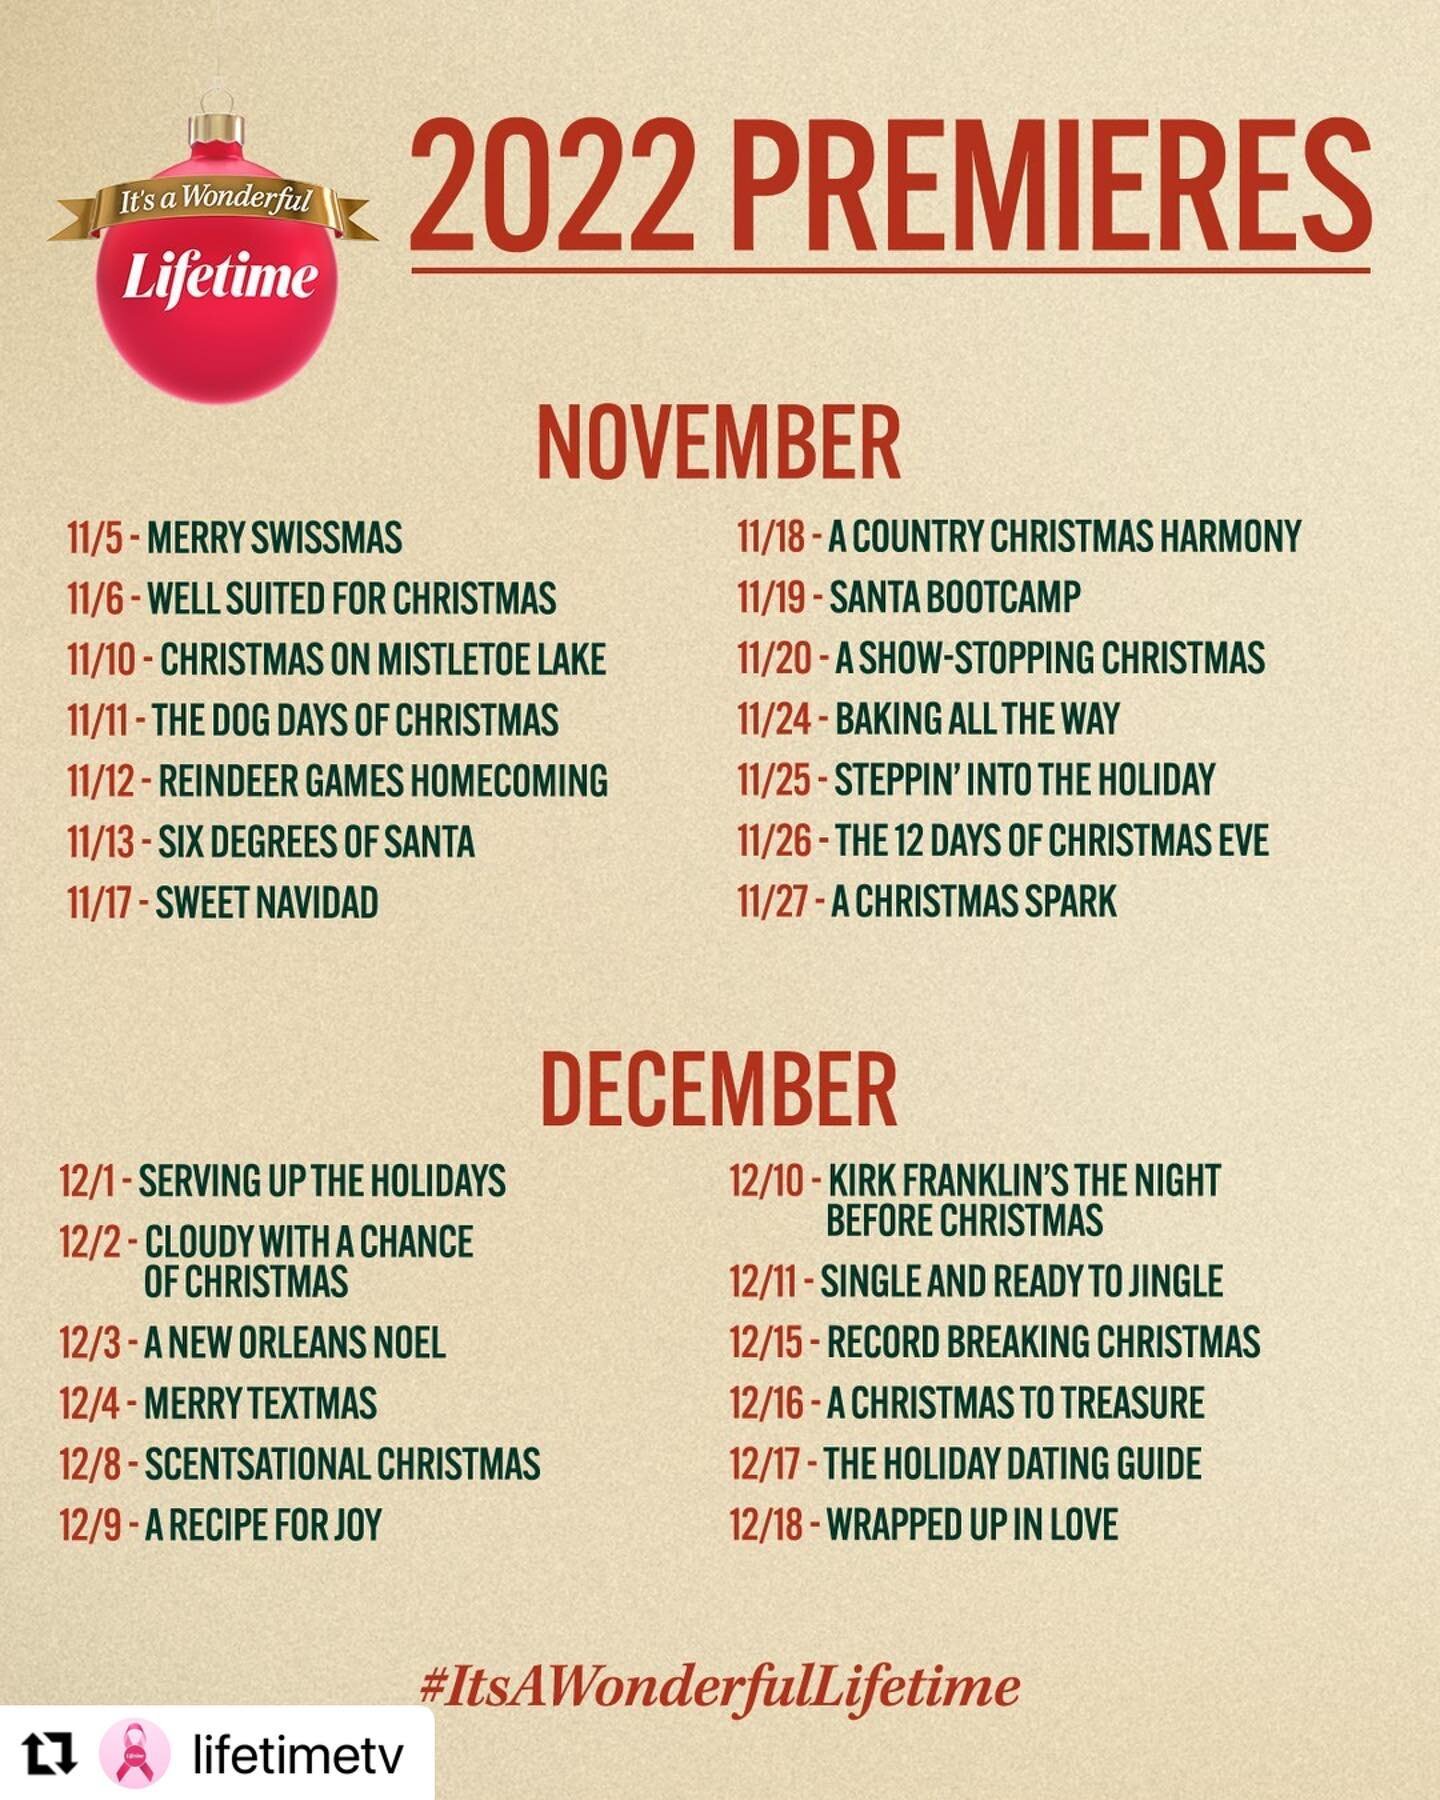 Woot woot! We have an official date for The Holiday Dating Guide (starring @mariamenounos and @brentmbailey) 12/17! 
Very proud of our crew @workhorsecinema, producers @zmafilms and getting to be next to @mikedono76 from start to finish. Learned so m